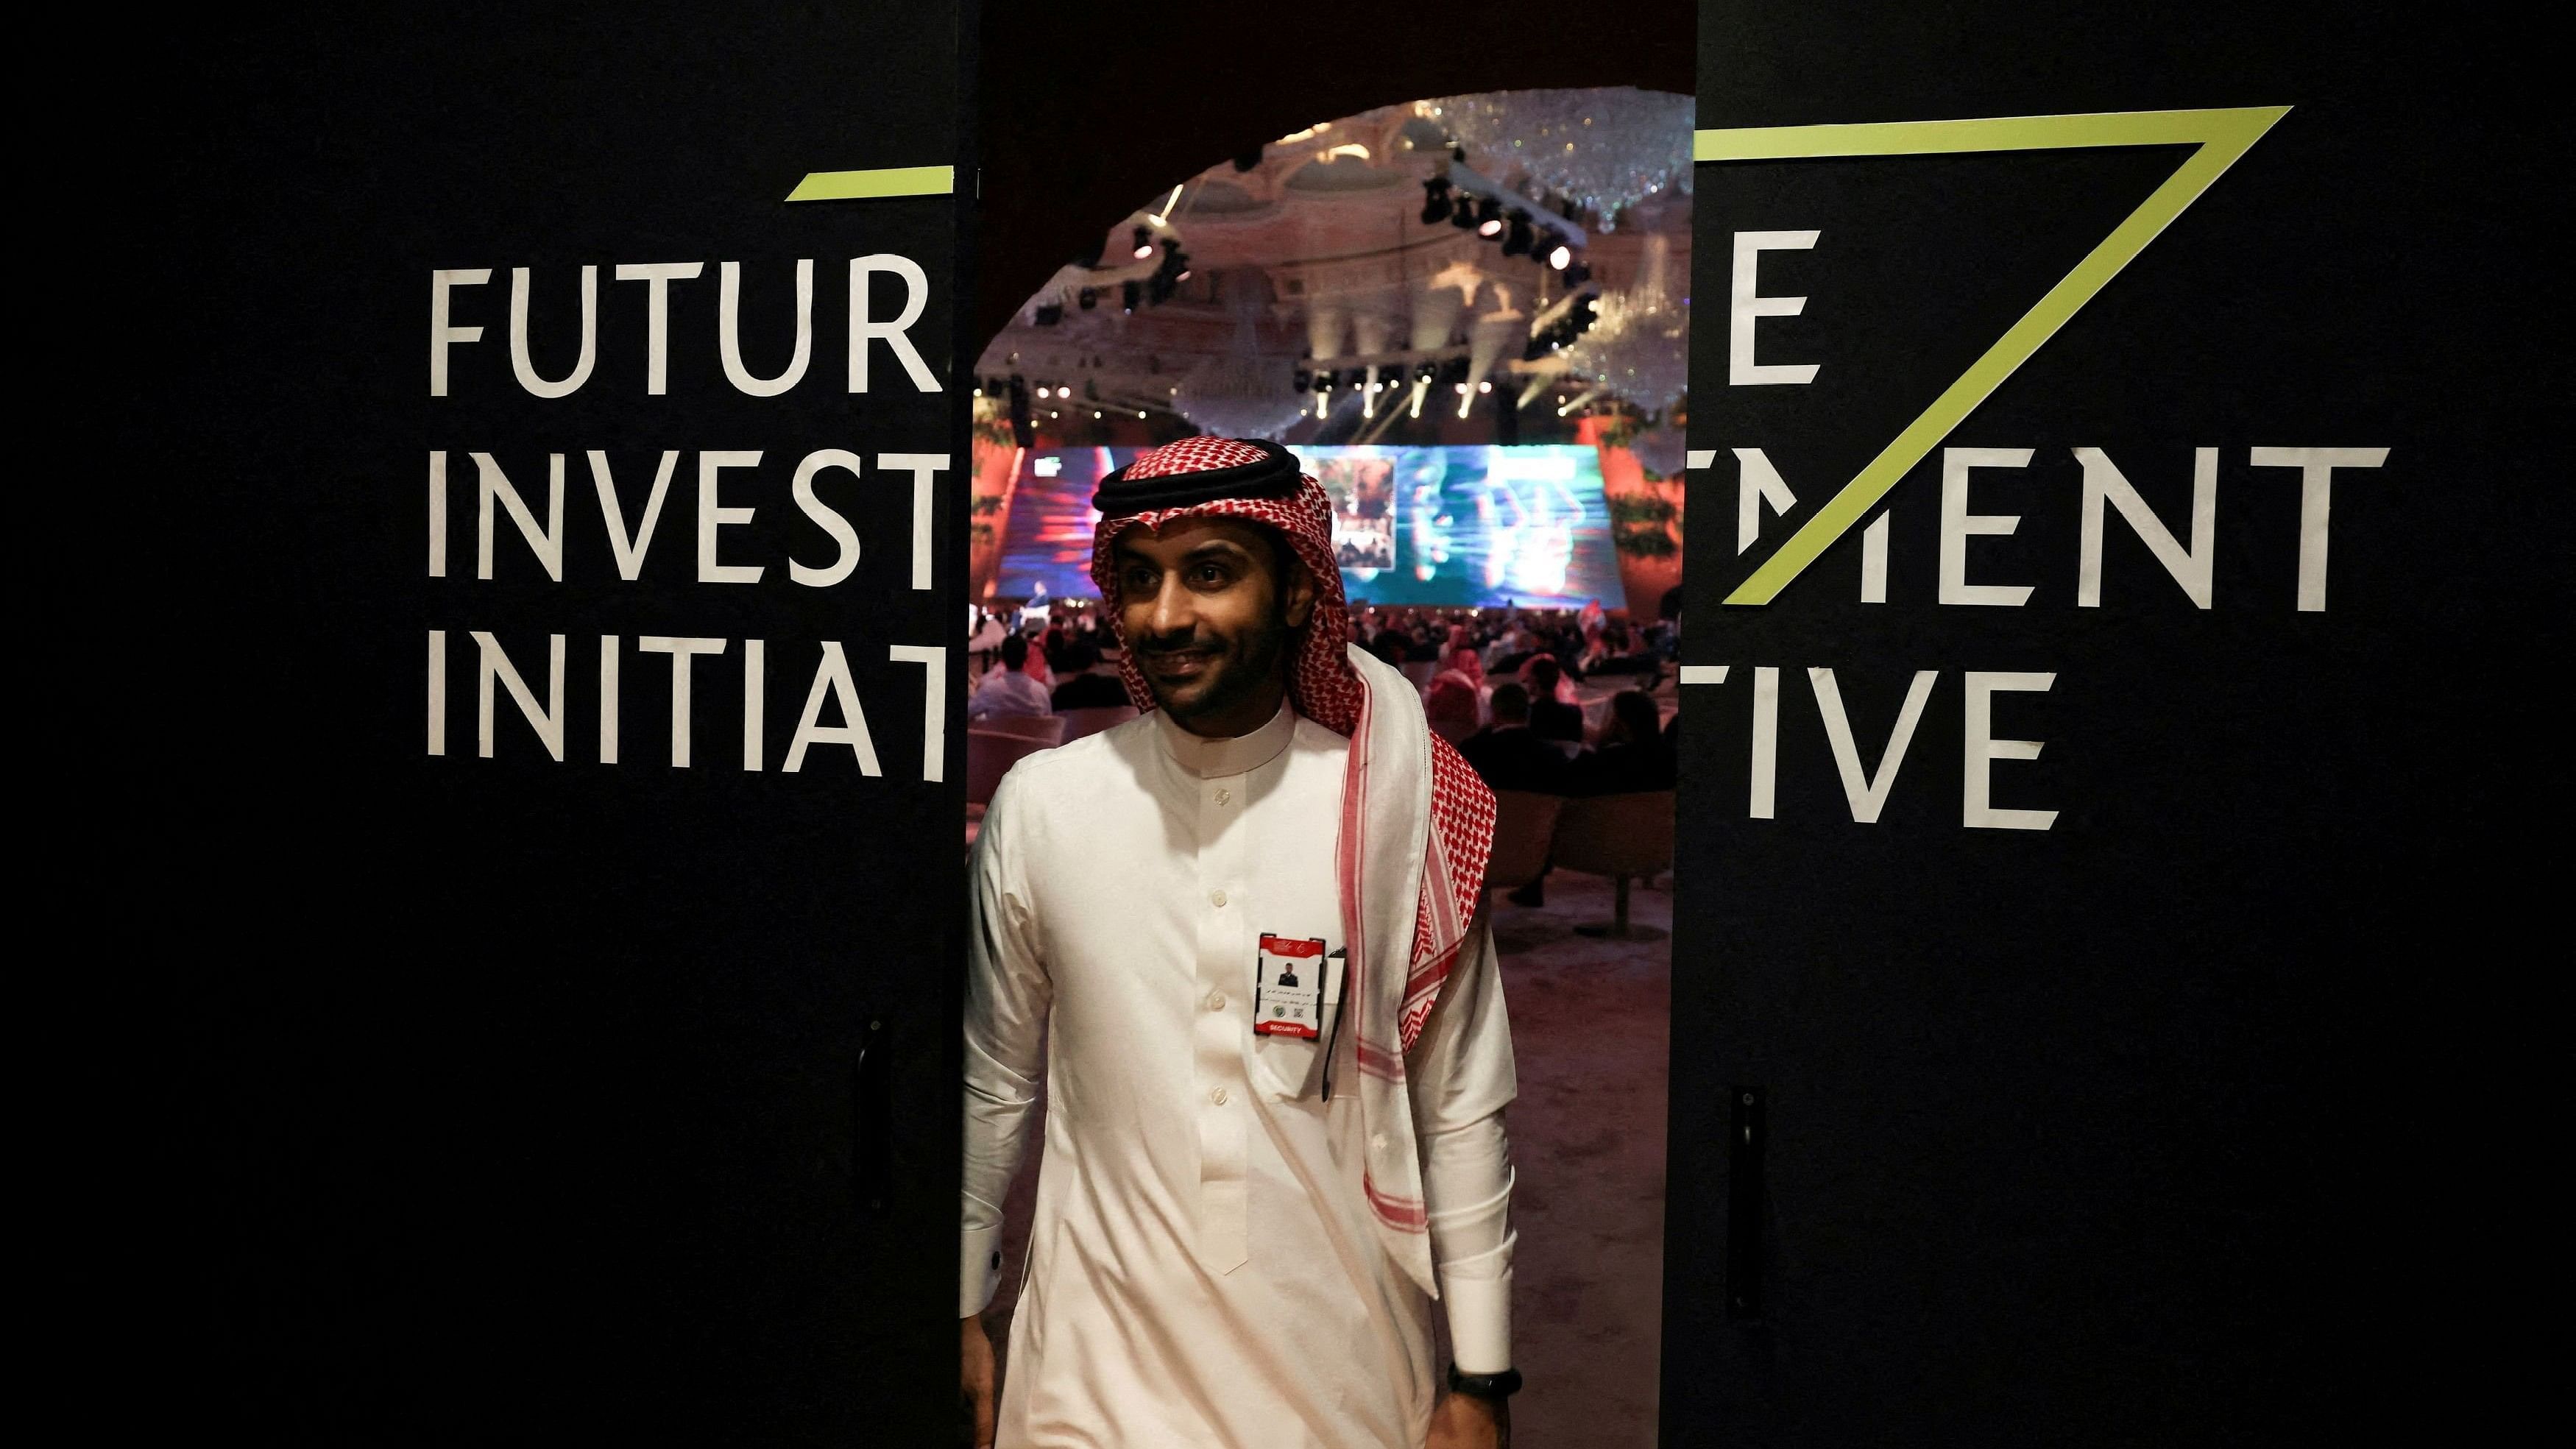 <div class="paragraphs"><p>A Saudi man's reflection is seen in mirror glass at the Future Investment Initiative conference, in Riyadh, Saudi Arabia.</p></div>